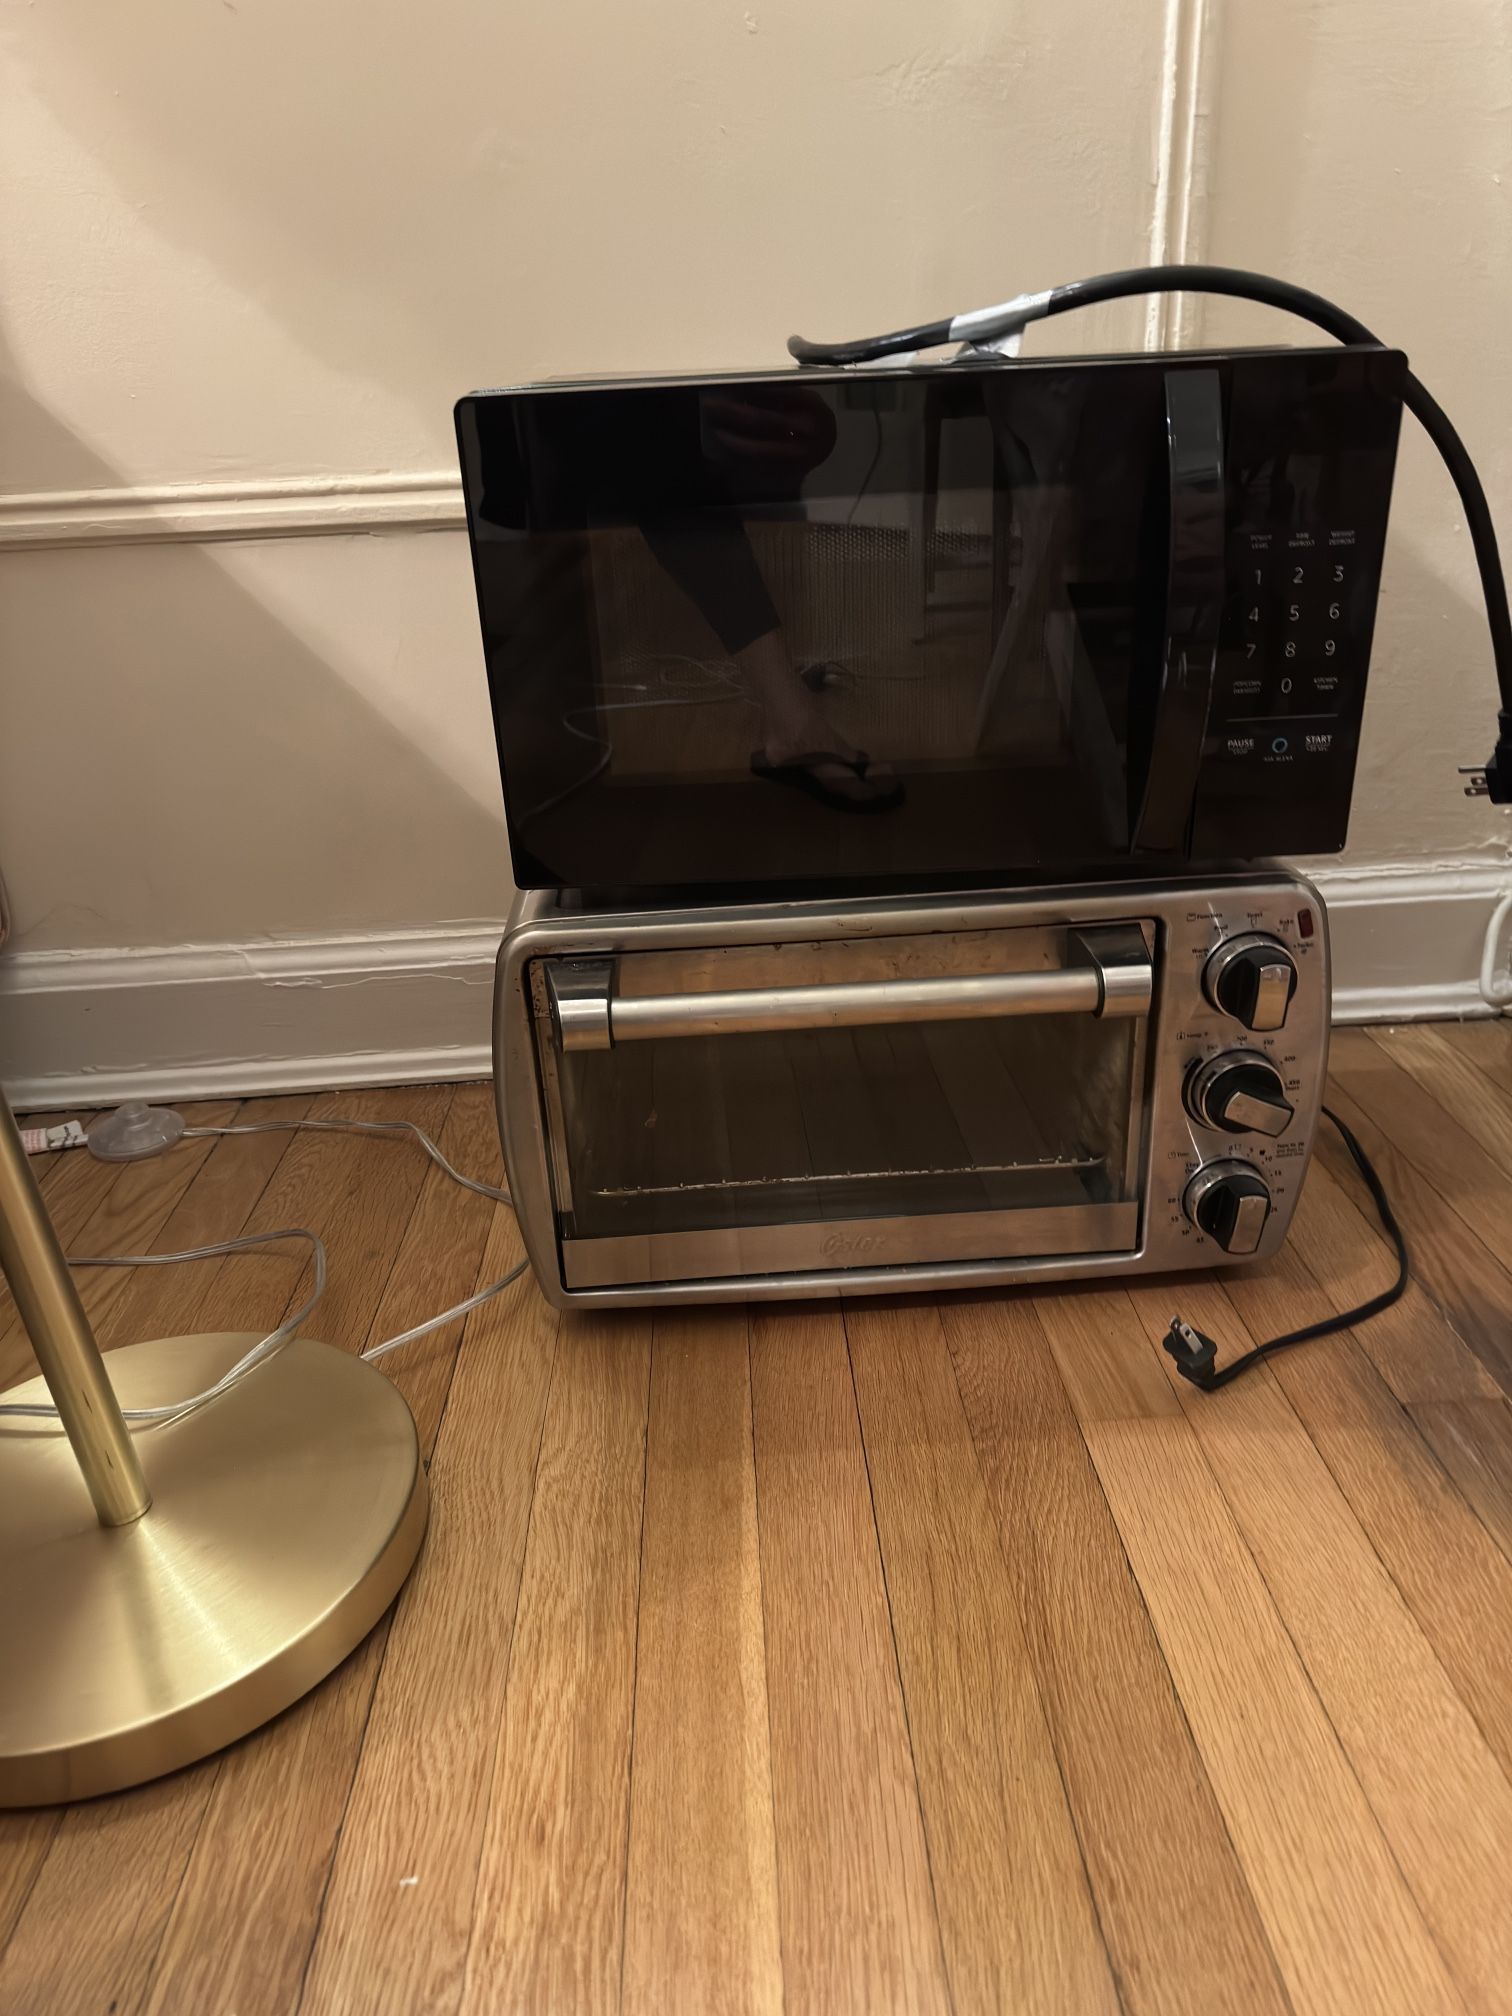 Microwave / Toaster Combo